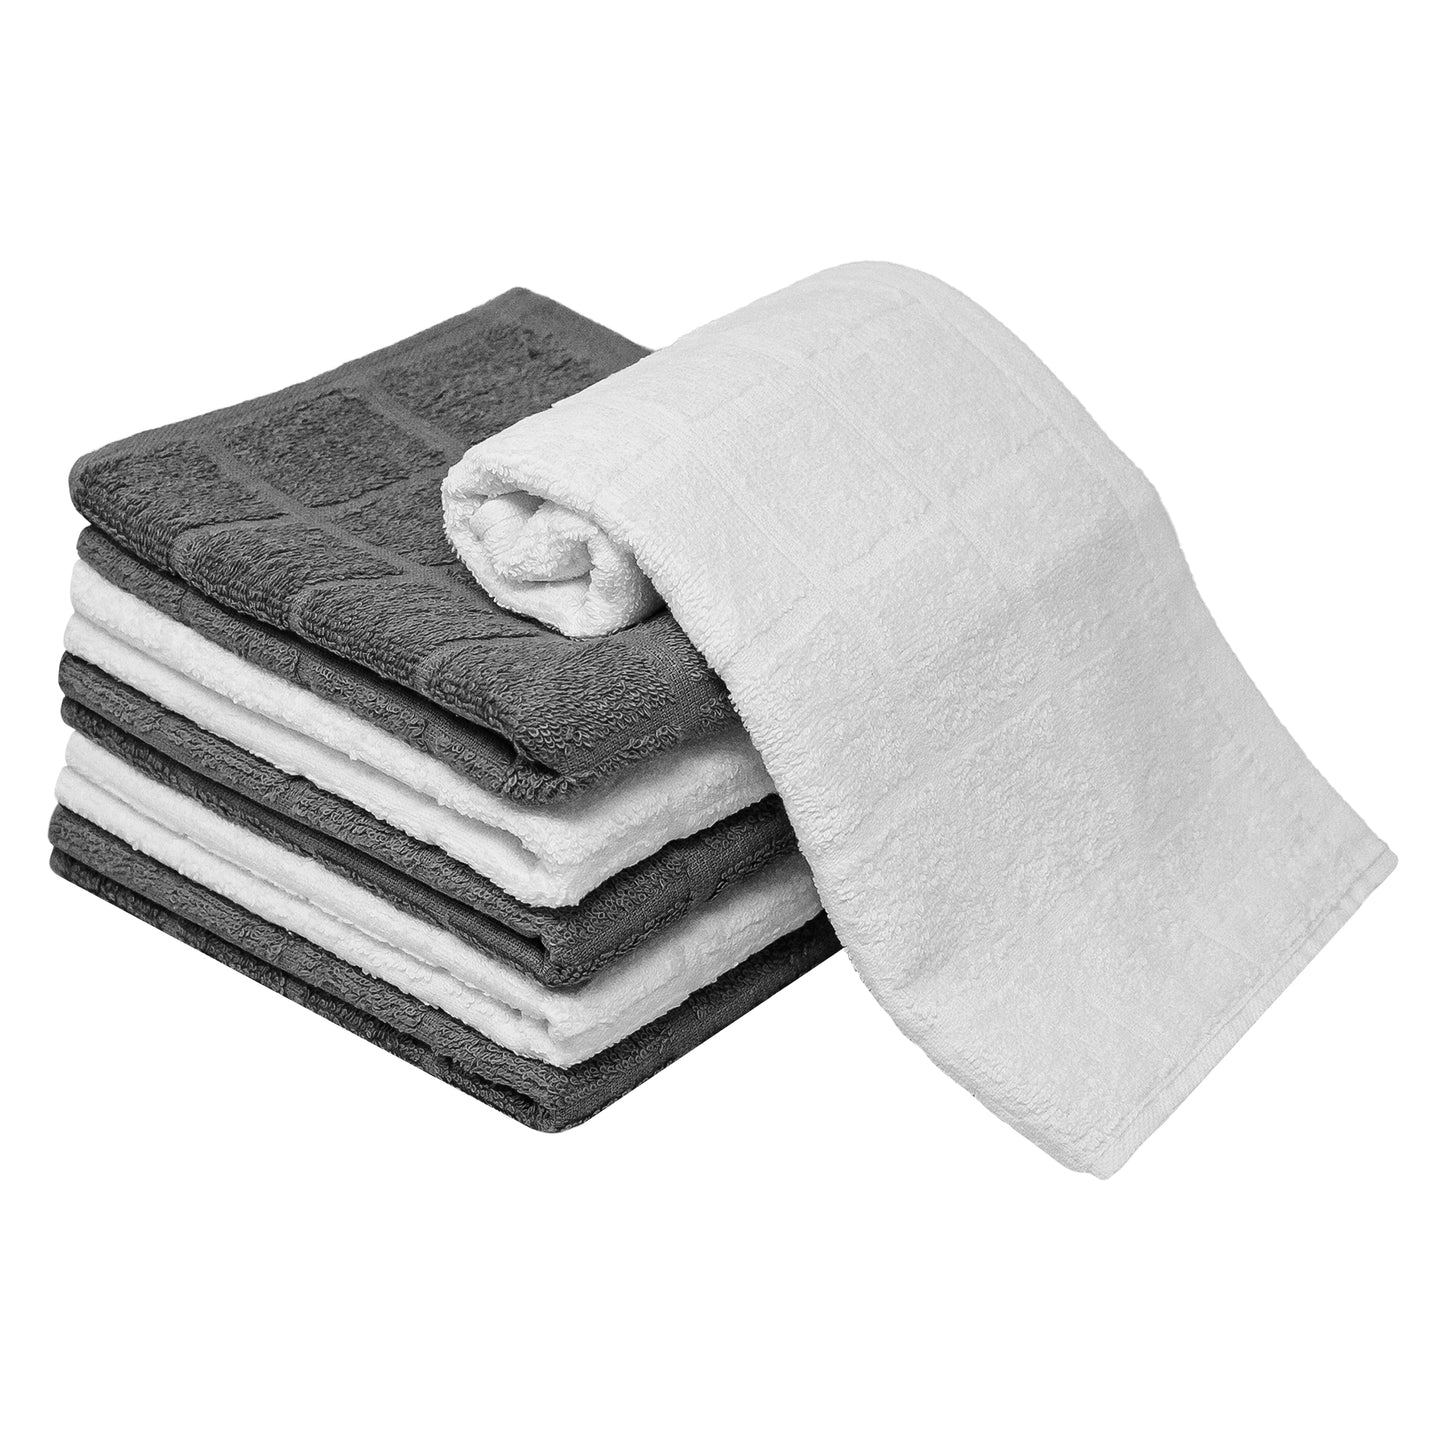 Dish Towels that Work, Super Absorbent, Oversize Organic Cotton Kitchen  Towels, Grey